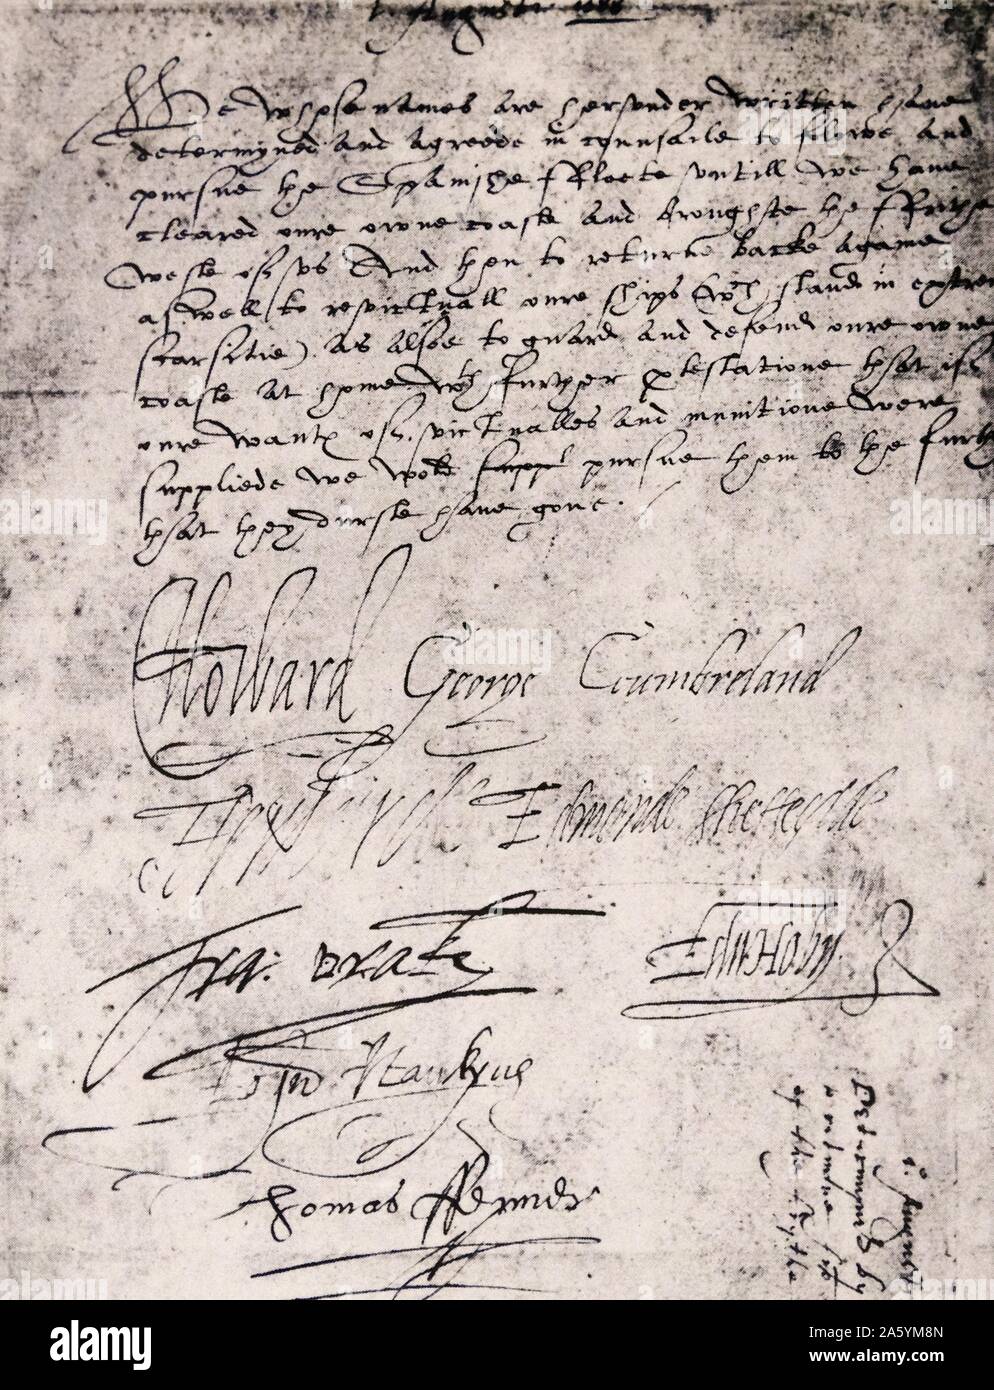 The Armada Resolution of eight English commanders, 1588, to follow the Armada past the Firth of Forth. From The Island Race, a 20th century book that covers the history of the British Isles from the pre-Roman times to the Victorian era. Written by Sir Winston Churchill and abridged by Timothy Baker. Stock Photo